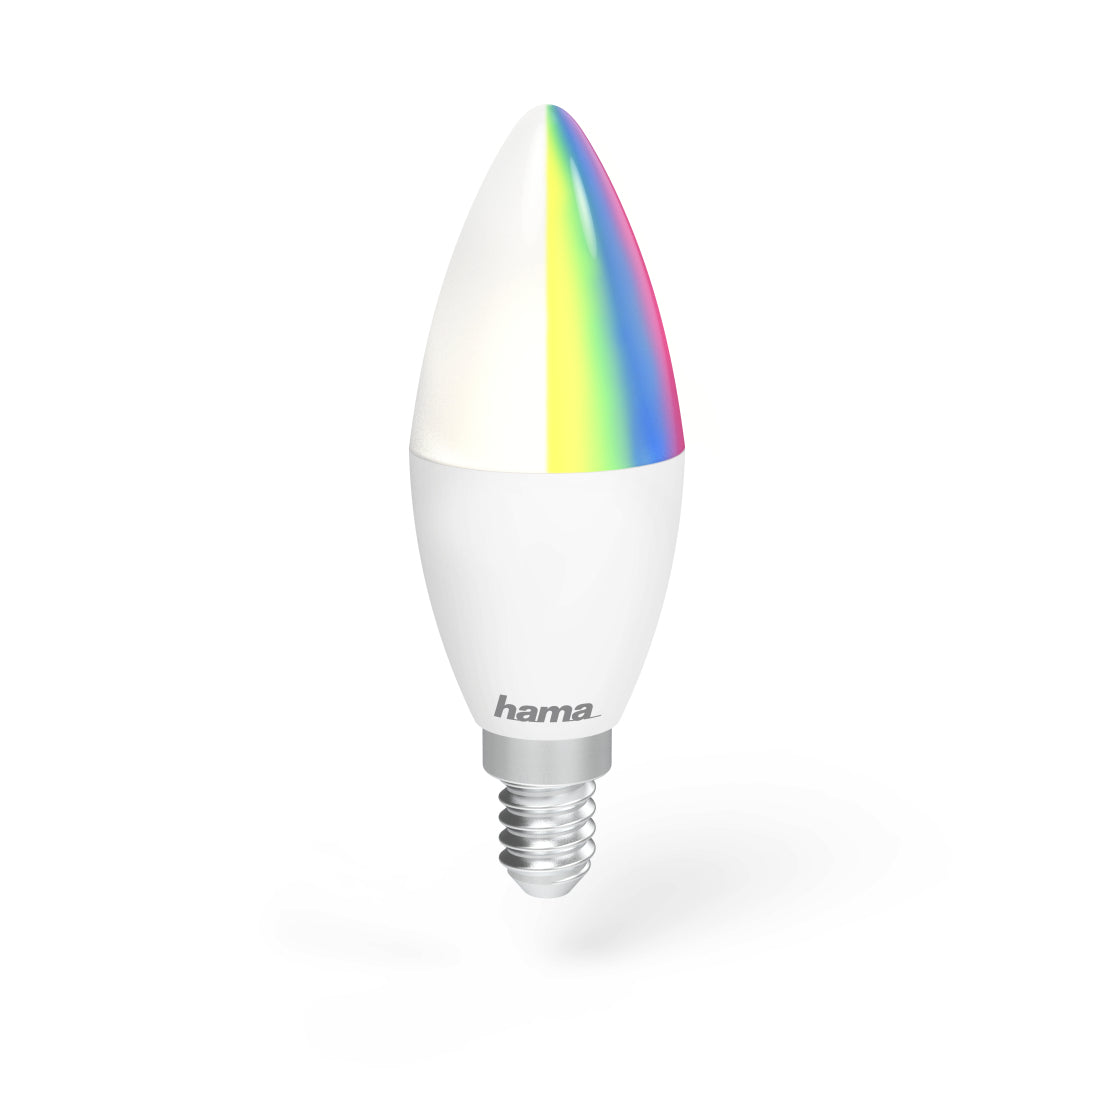 WiFi-LED Light HAMA, E14, 5.5W, RGB+CCT, Can be Dimmed, 470Lm, for voice app/control